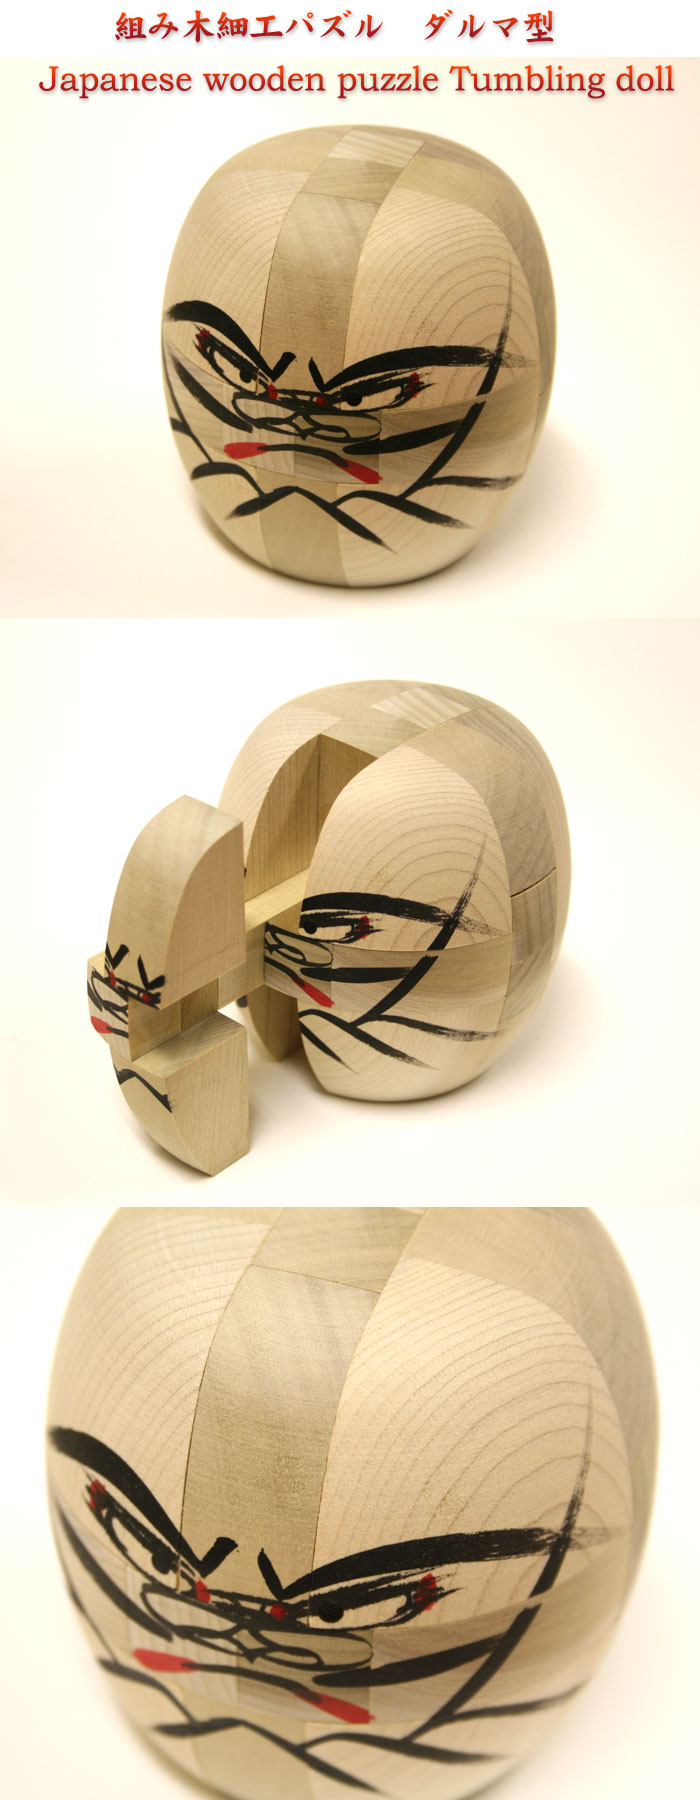 Japanese wooden puzzle Tumbling doll